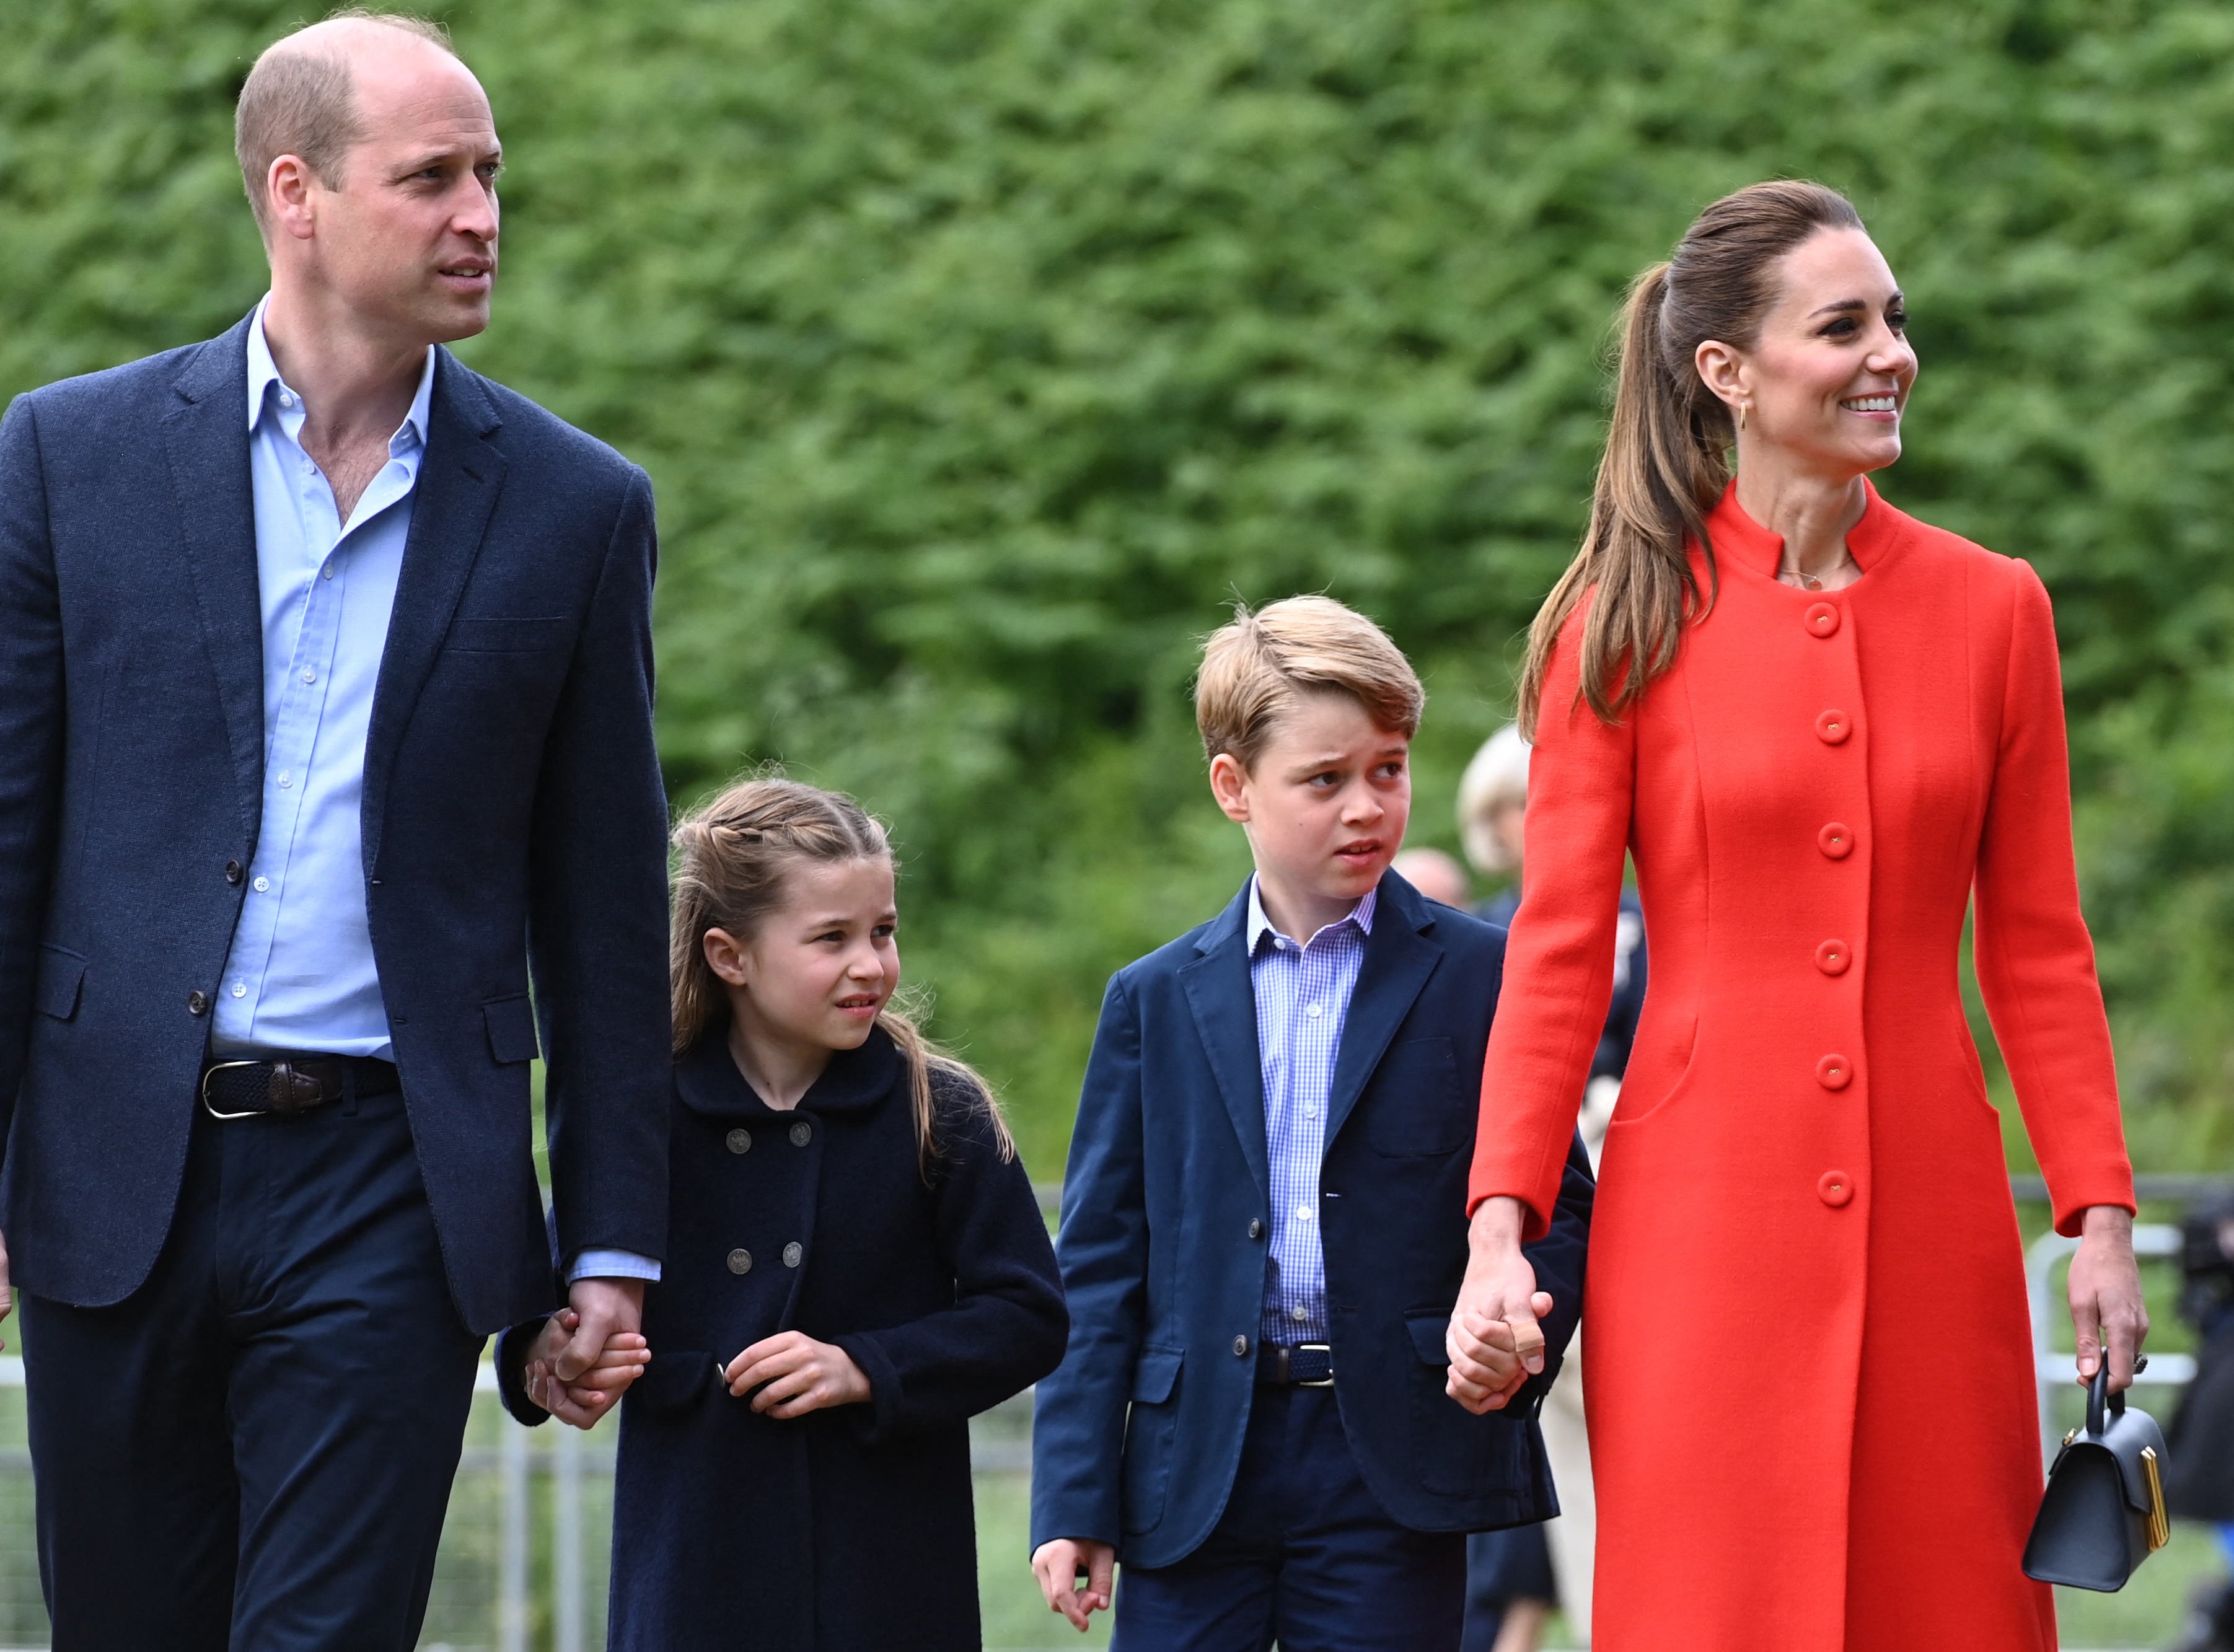 Britain's Prince William, Duke of Cambridge, Britain's Catherine, Duchess of Cambridge, and their children Britain's Prince George and Britain's Princess Charlotte visit Cardiff Castle in Wales on June 4, 2022 as part of the royal family's tour for Queen Elizabeth II's platinum jubilee celebrations. | Source: Getty Images